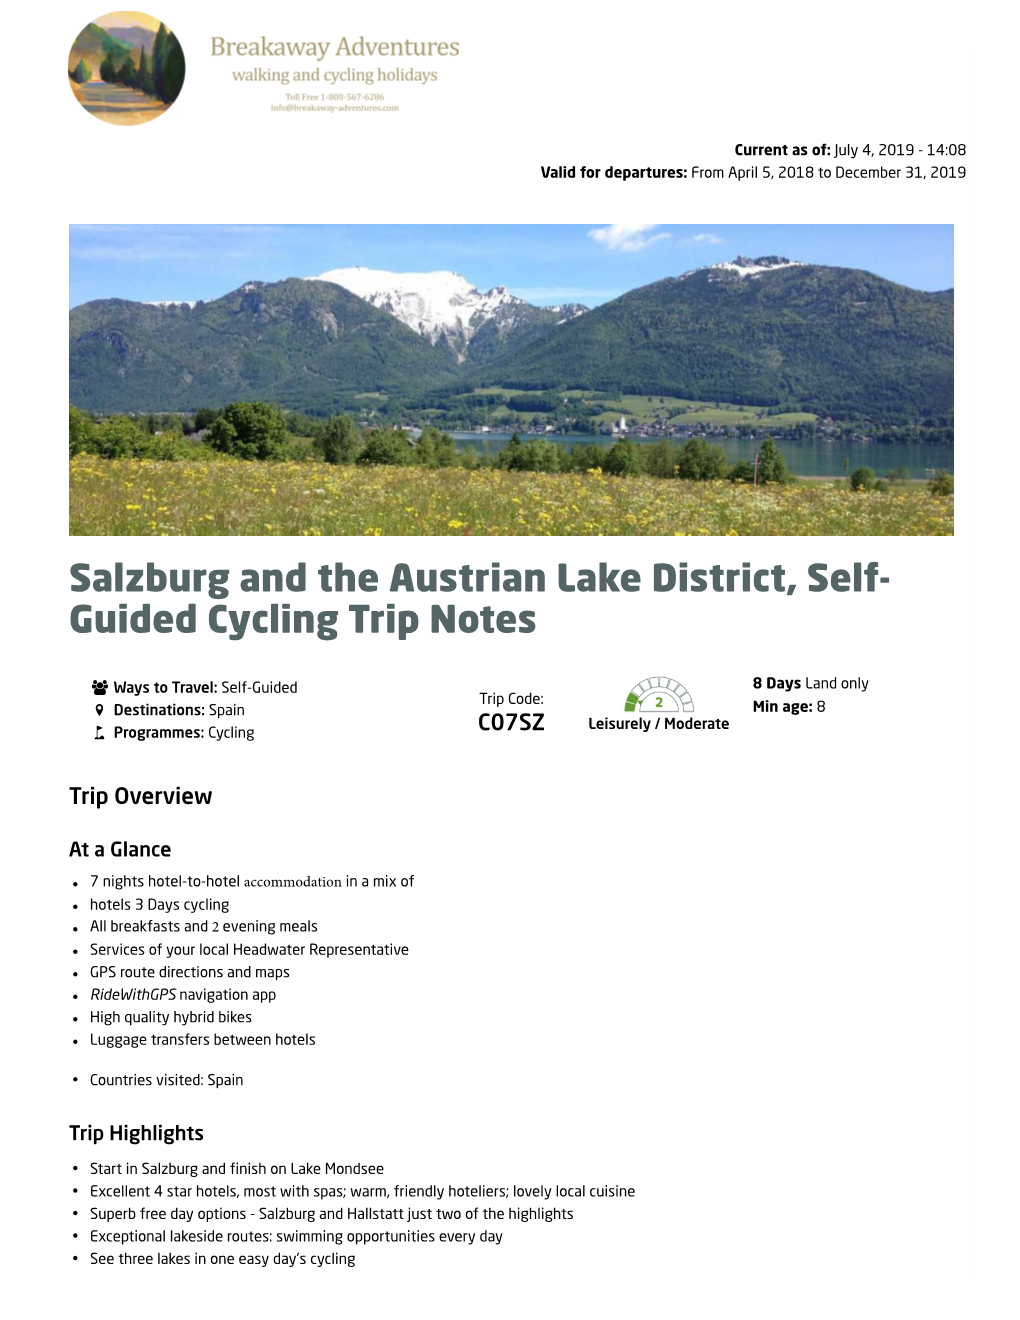 Salzburg and the Austrian Lake District, Self- Guided Cycling Trip Notes